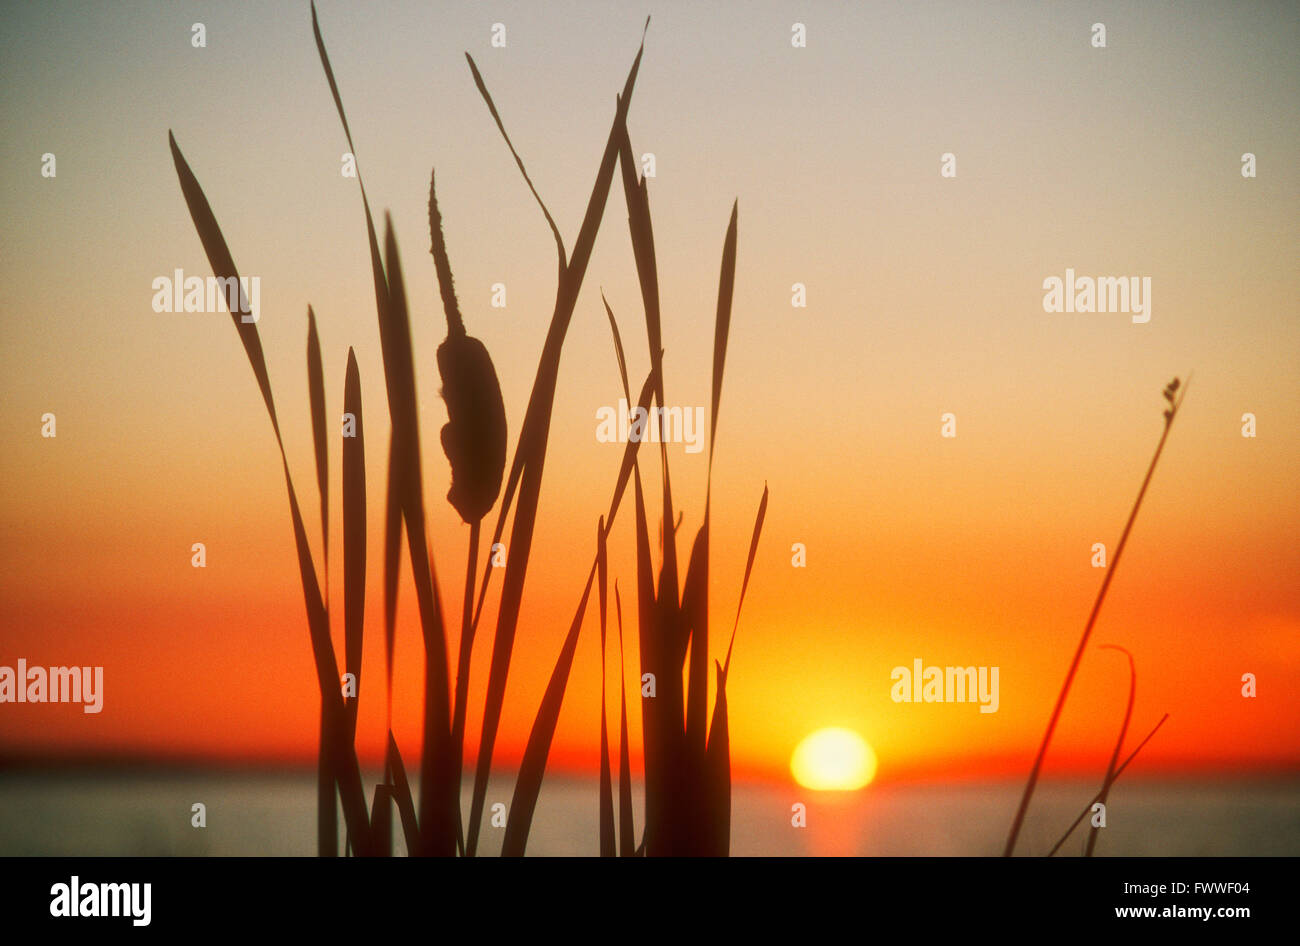 Bulrushes Silhouetted Against Sunset, Alberta, Canada Stock Photo